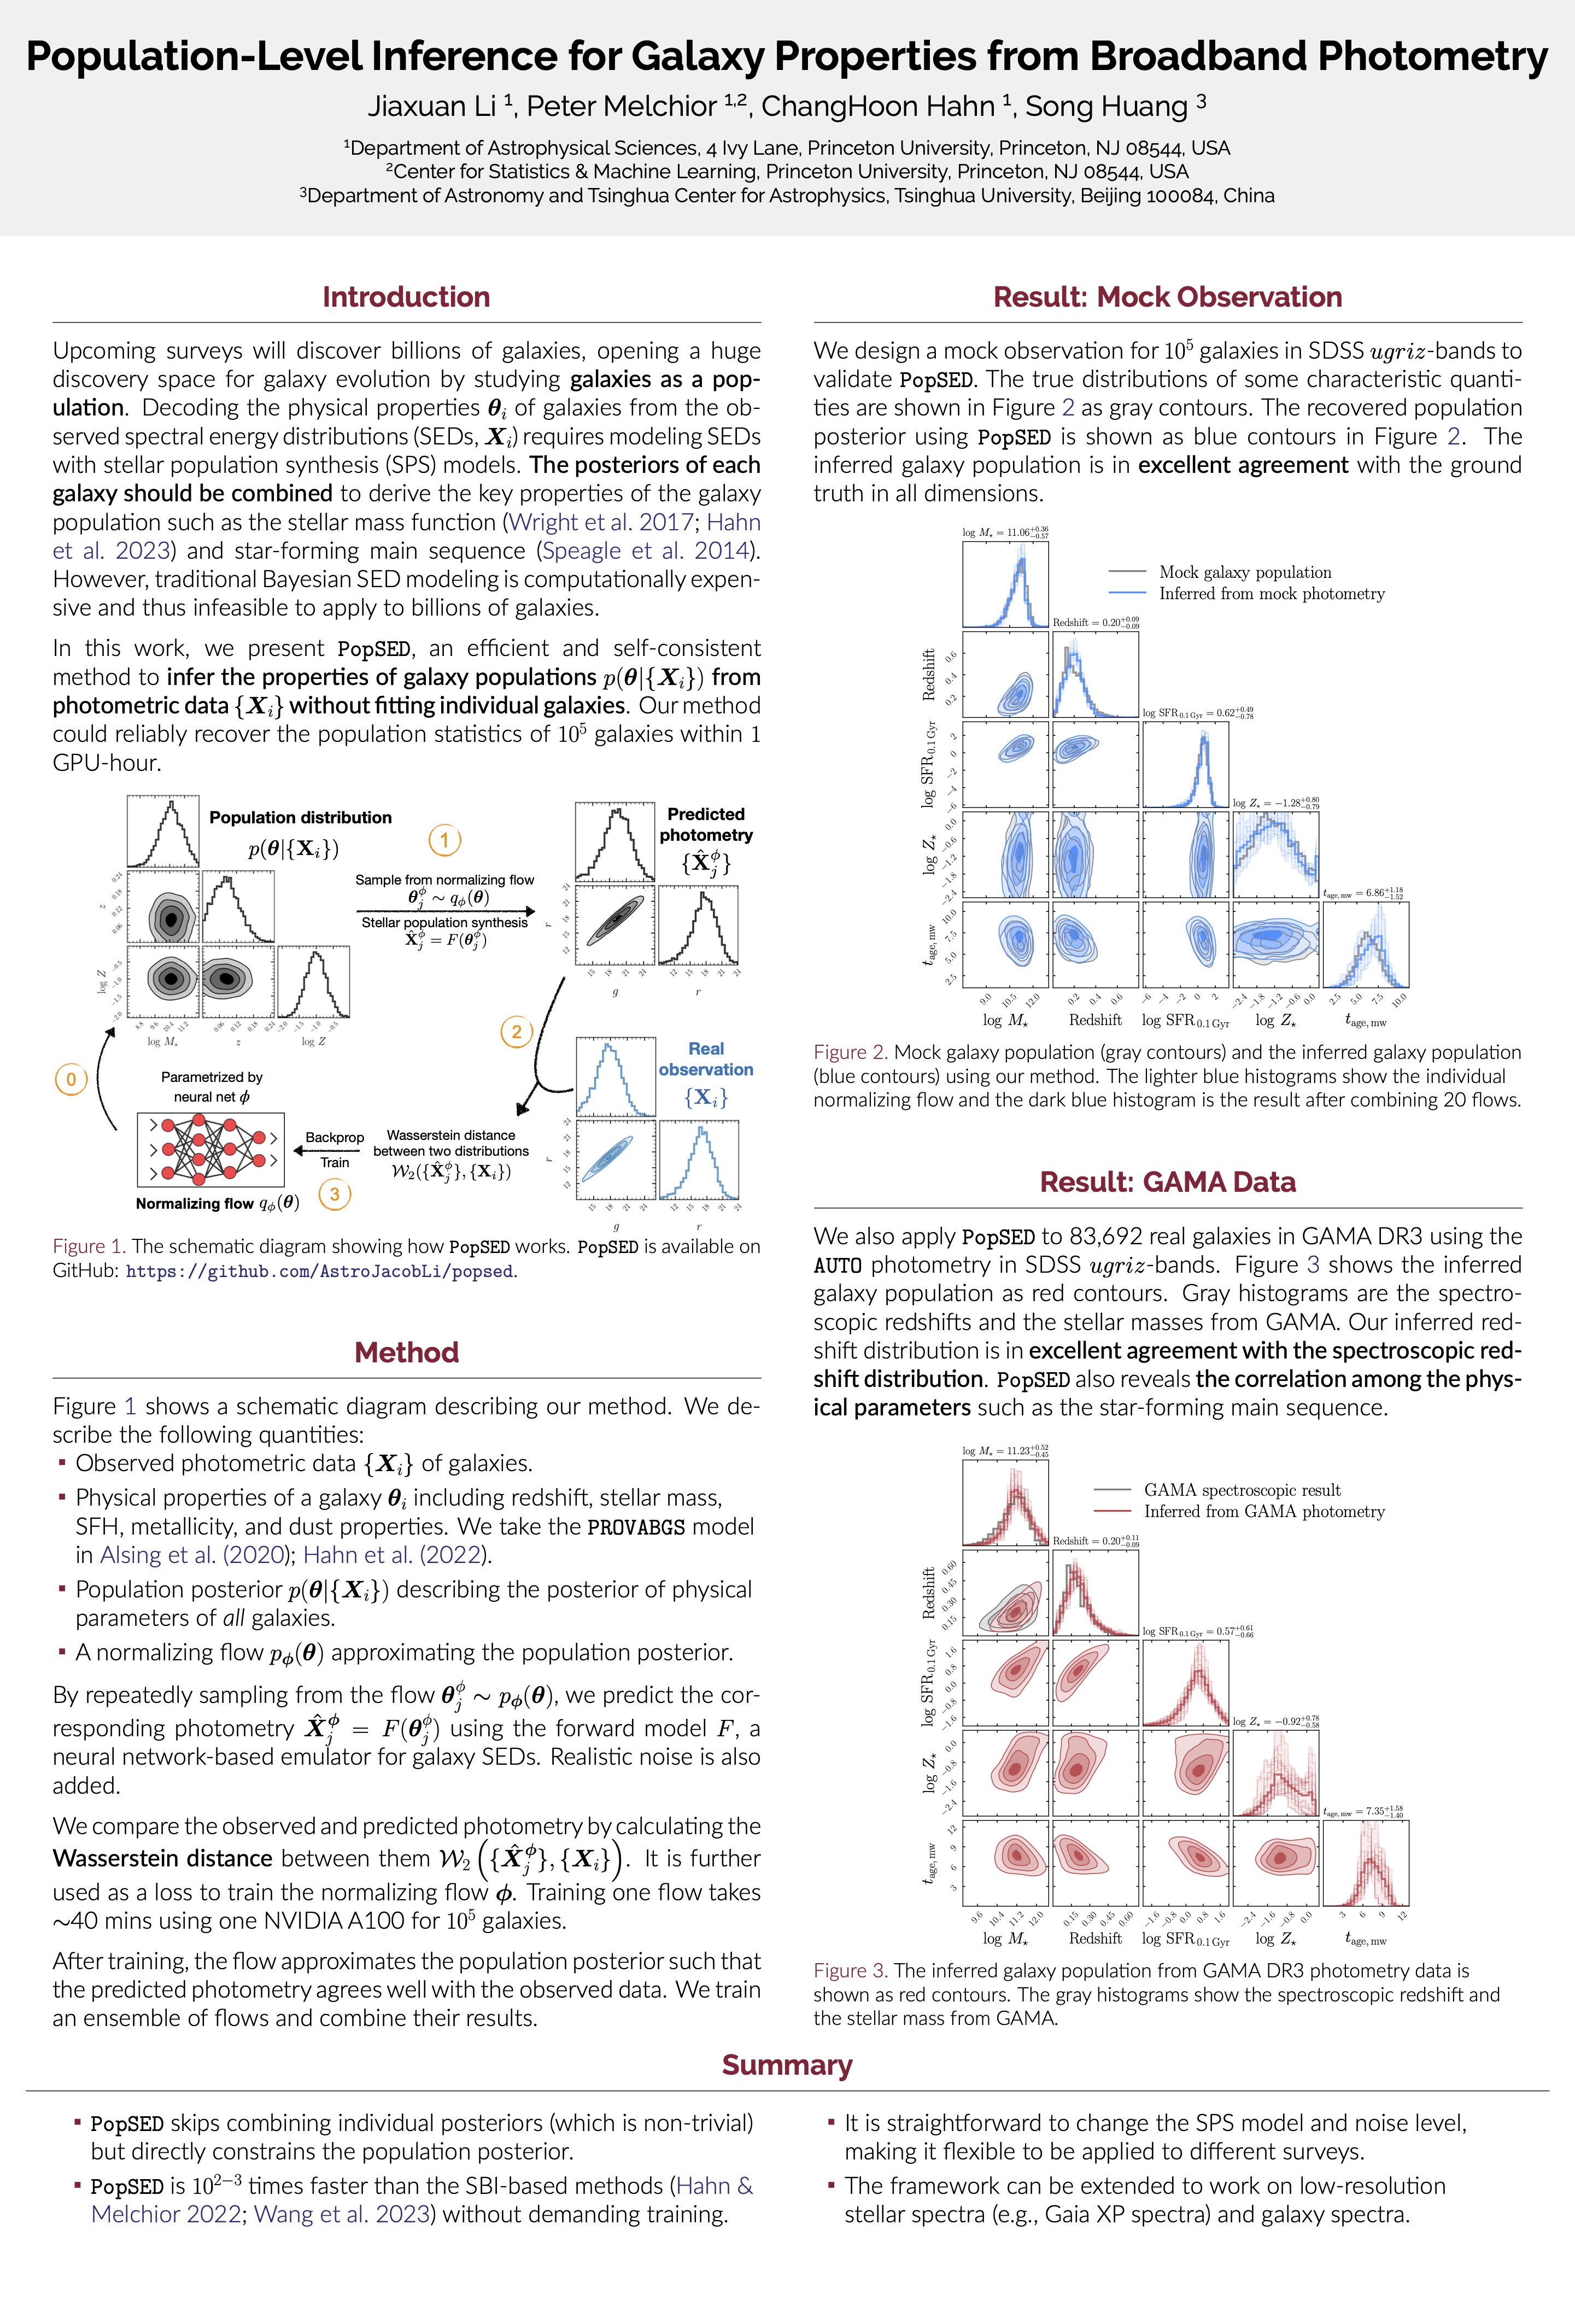 Poster of PopSED for the MLxAstro workshop in 2023 ICML